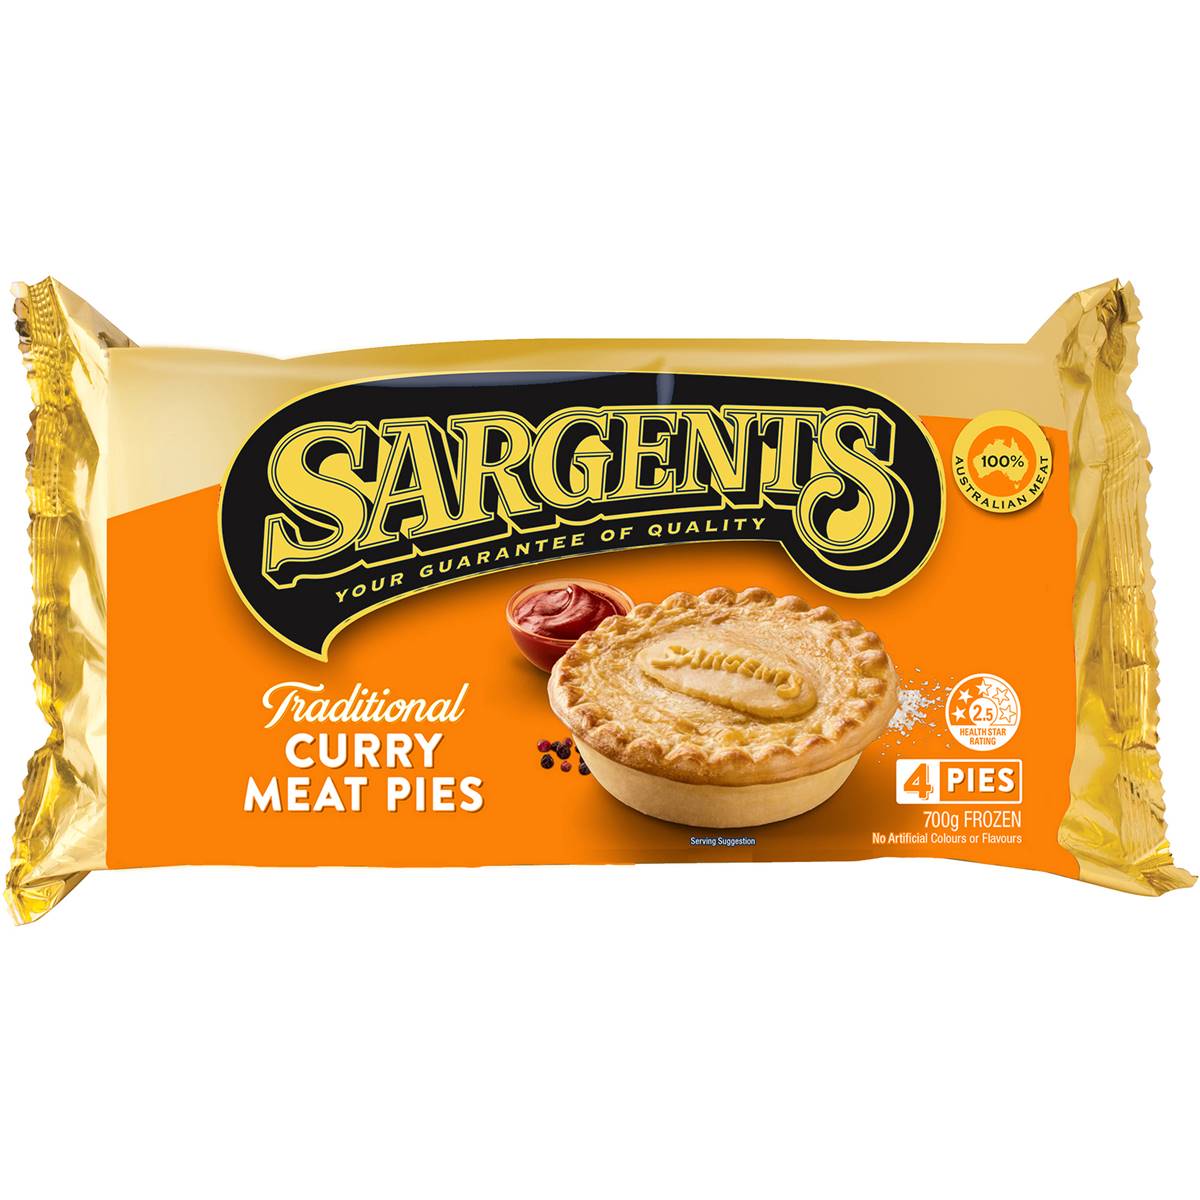 Calories in Sargents Traditional Curry Meat Pies